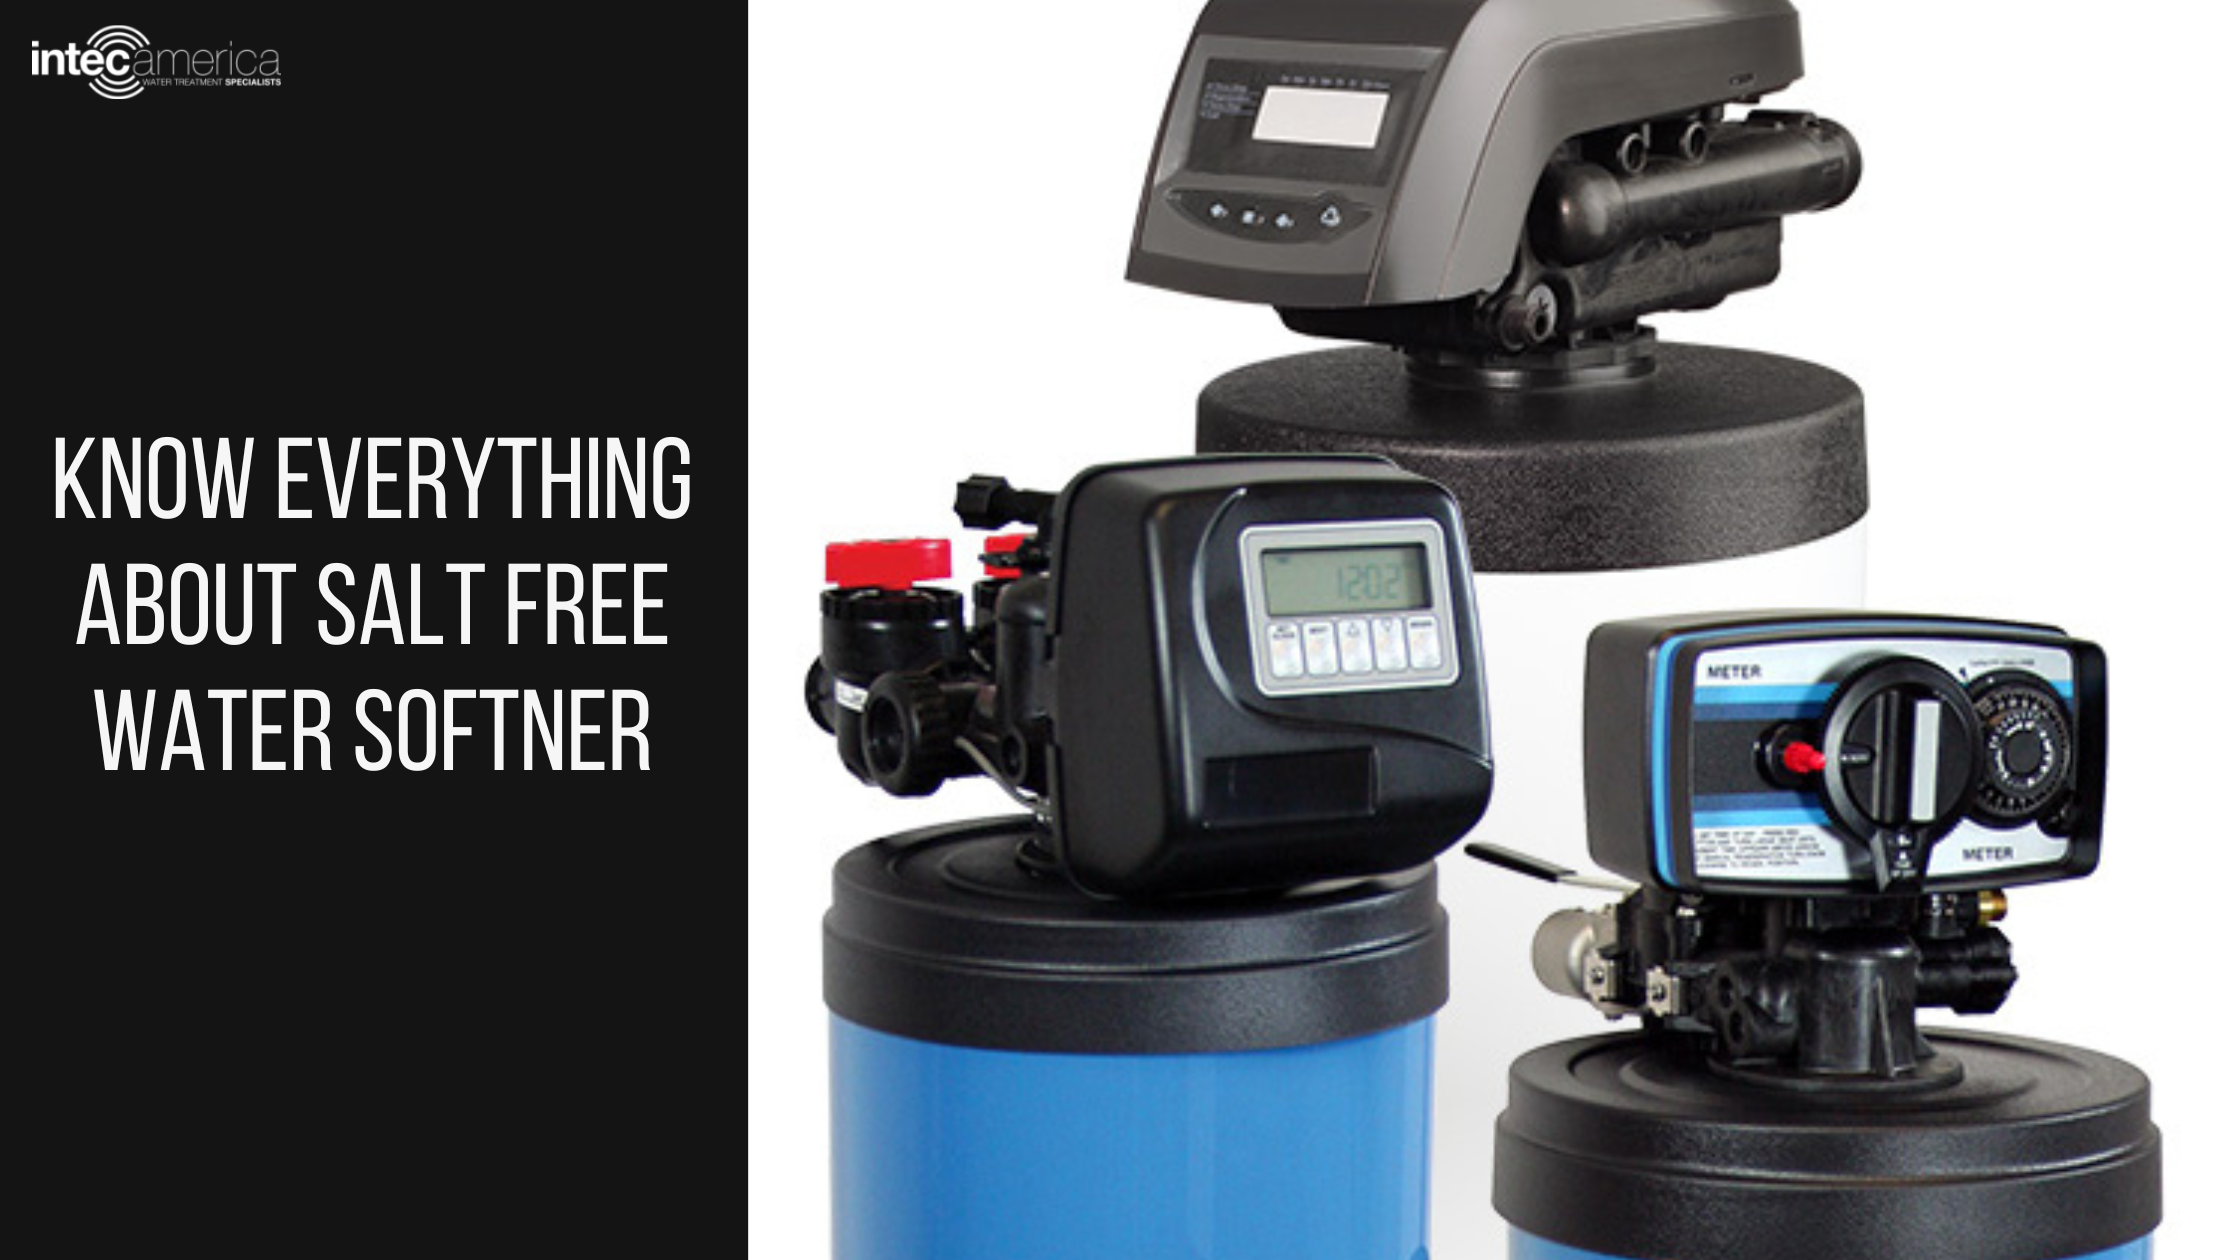 Salt-Free Water Softeners for Residential Water Treatments